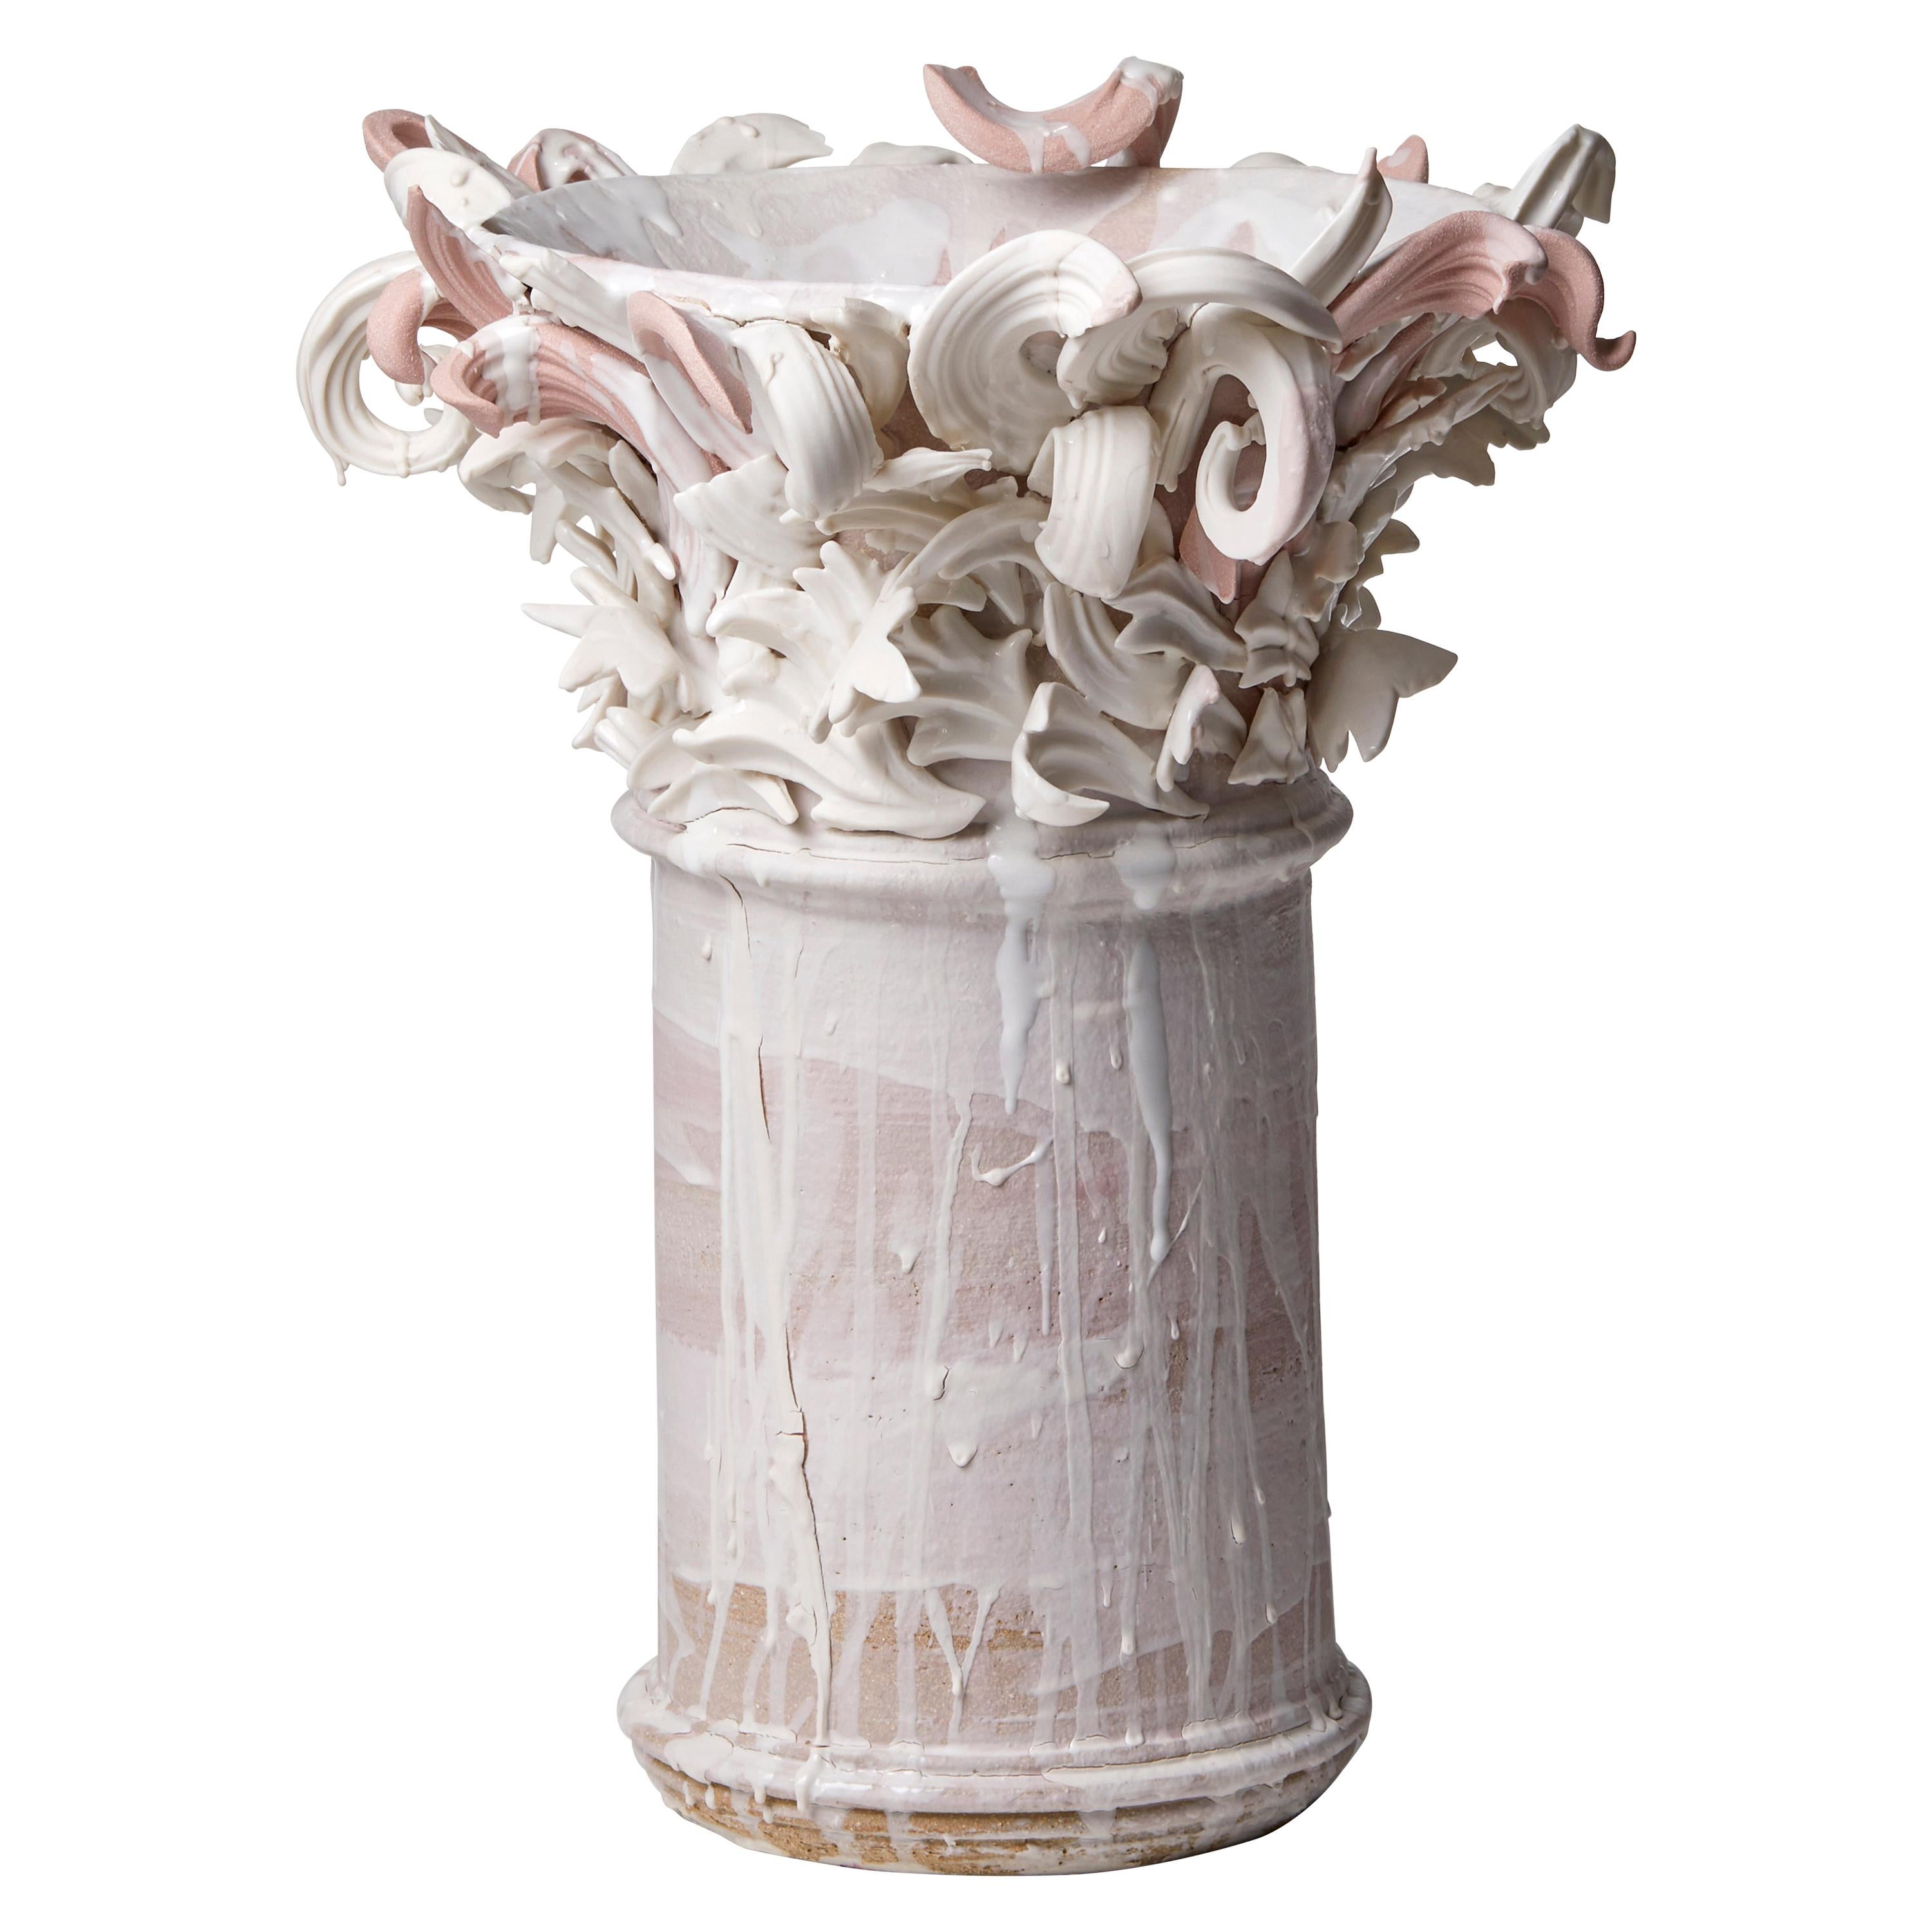 Colonnade III, a Unique Ceramic Sculptural Vase in Pink & White by Jo Taylor